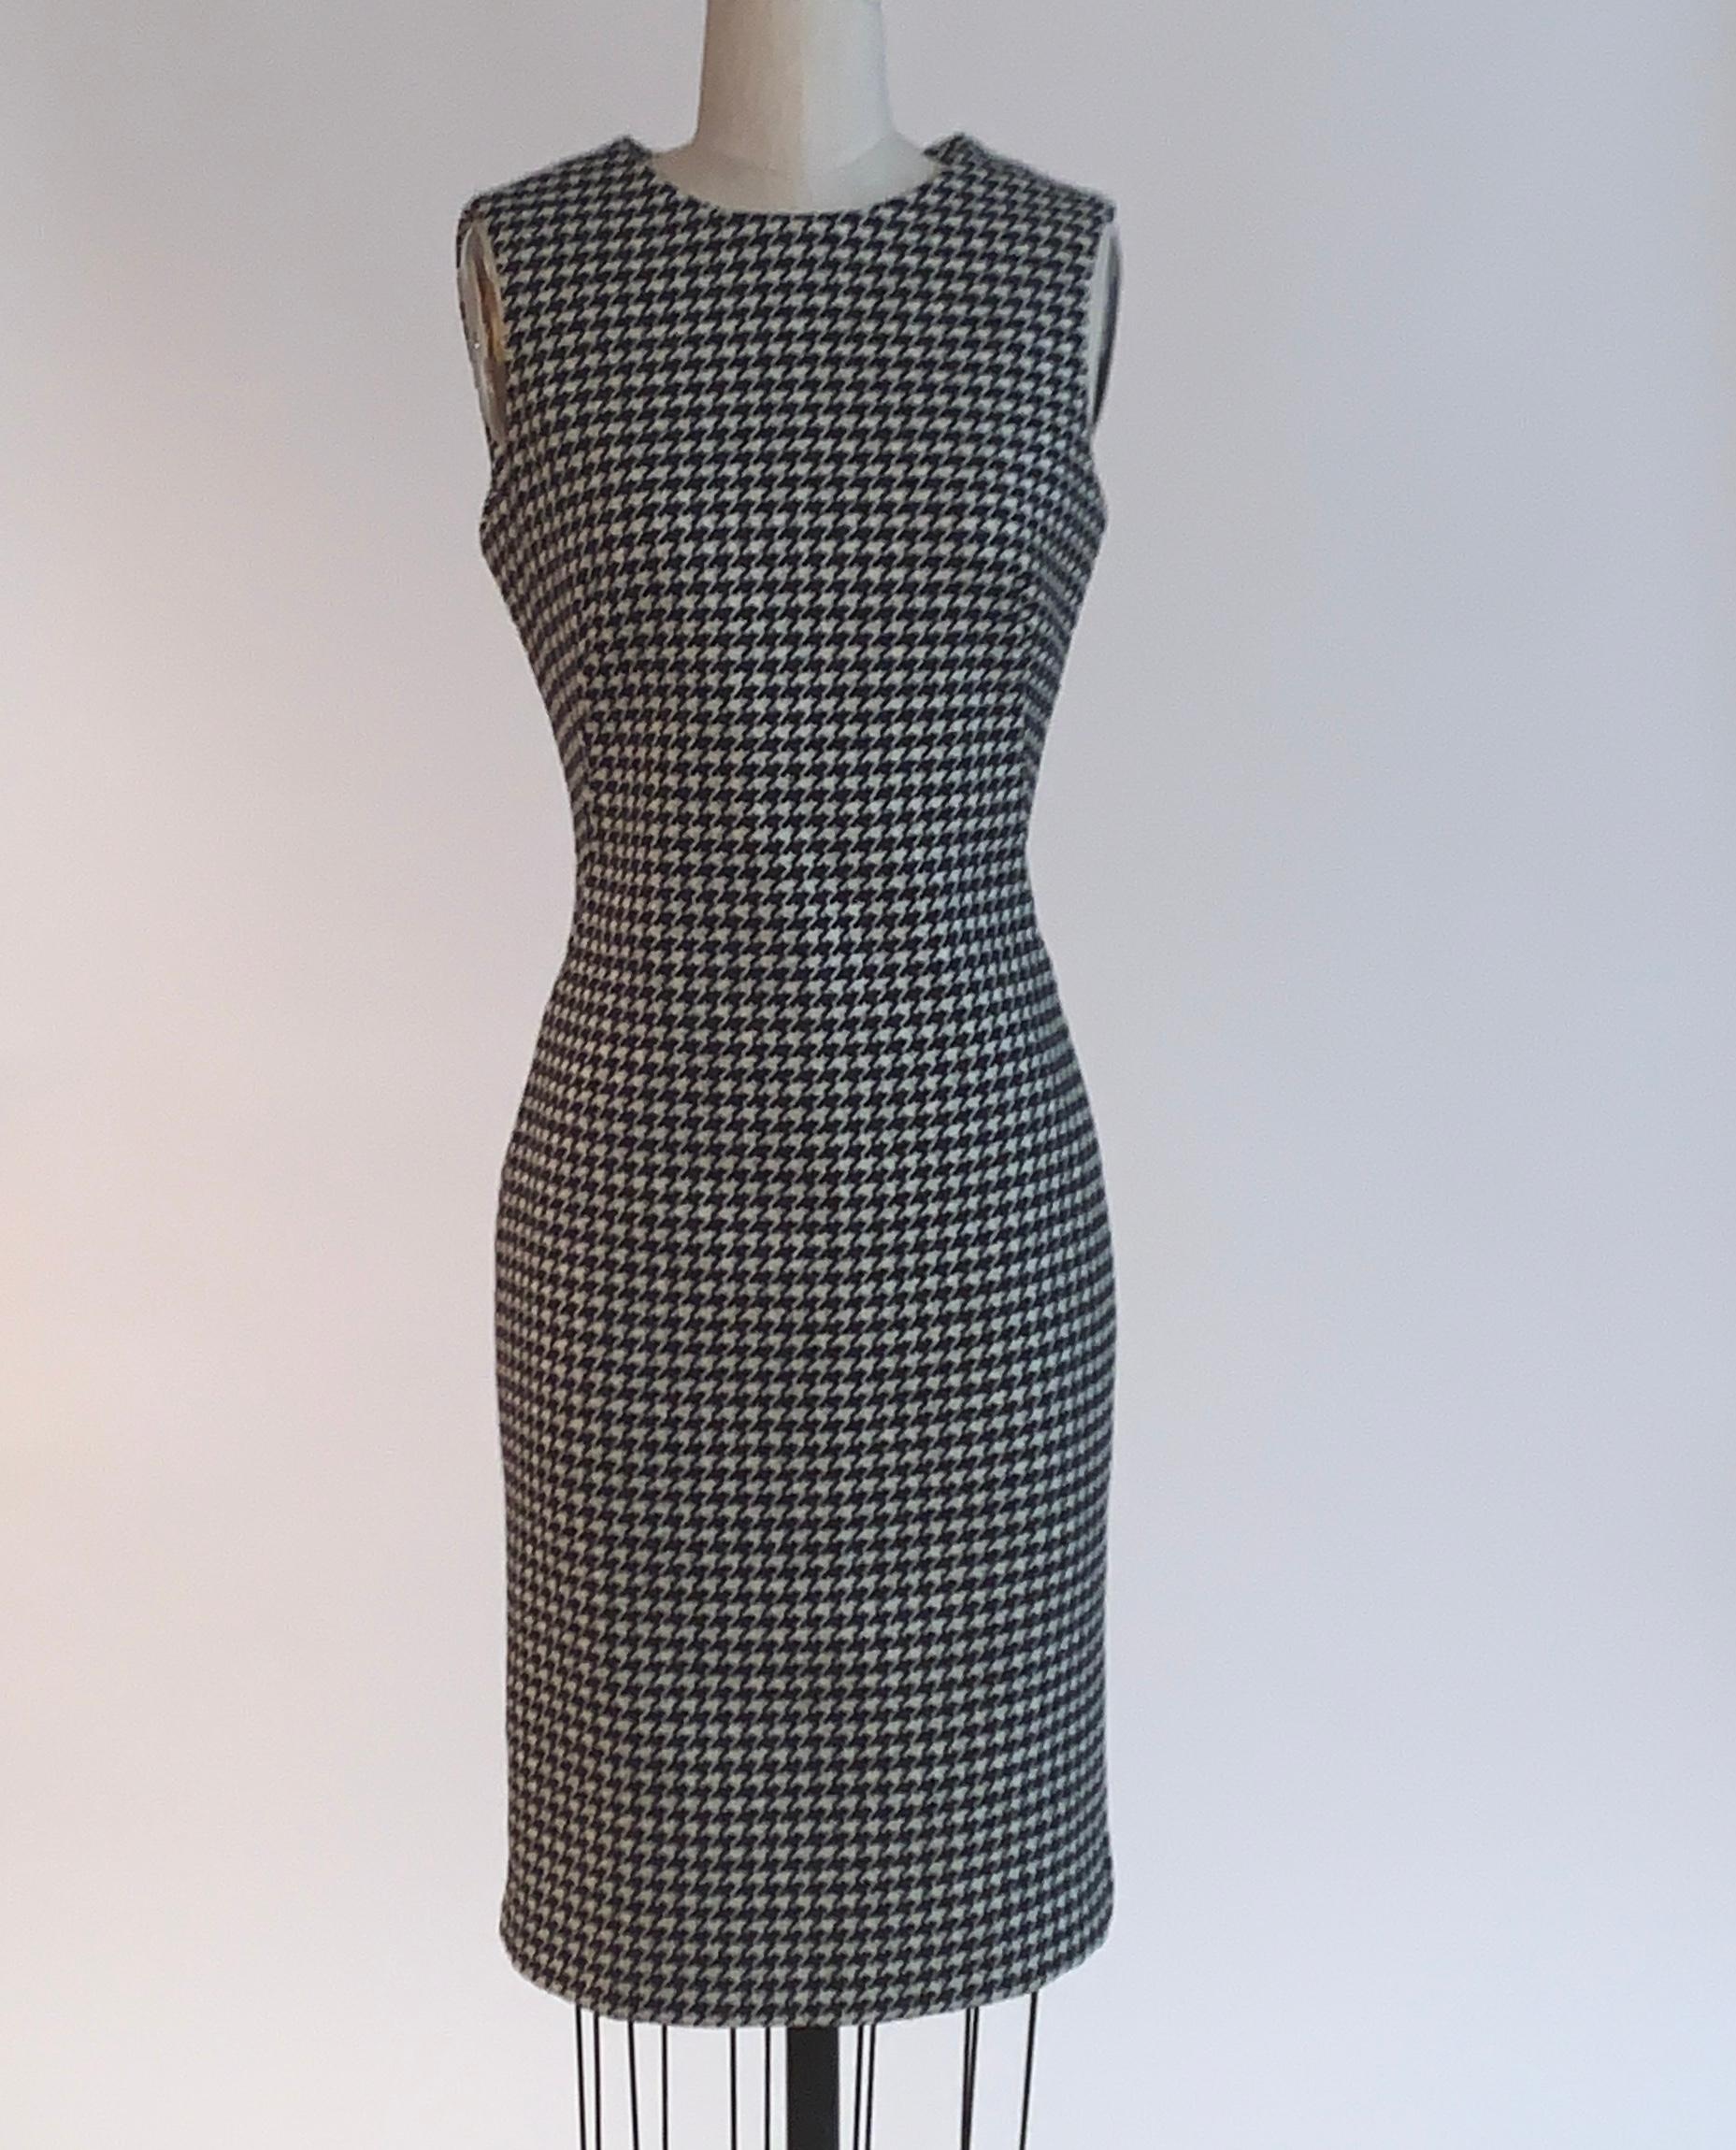 Alexander McQueen sleeveless dress in the black and white houndstooth wool that became so iconic from the Fall 2009 Horn of Plenty collection. Dress is wonderfully tailored and has boning at sides to create a great shape. Back zip and hook and